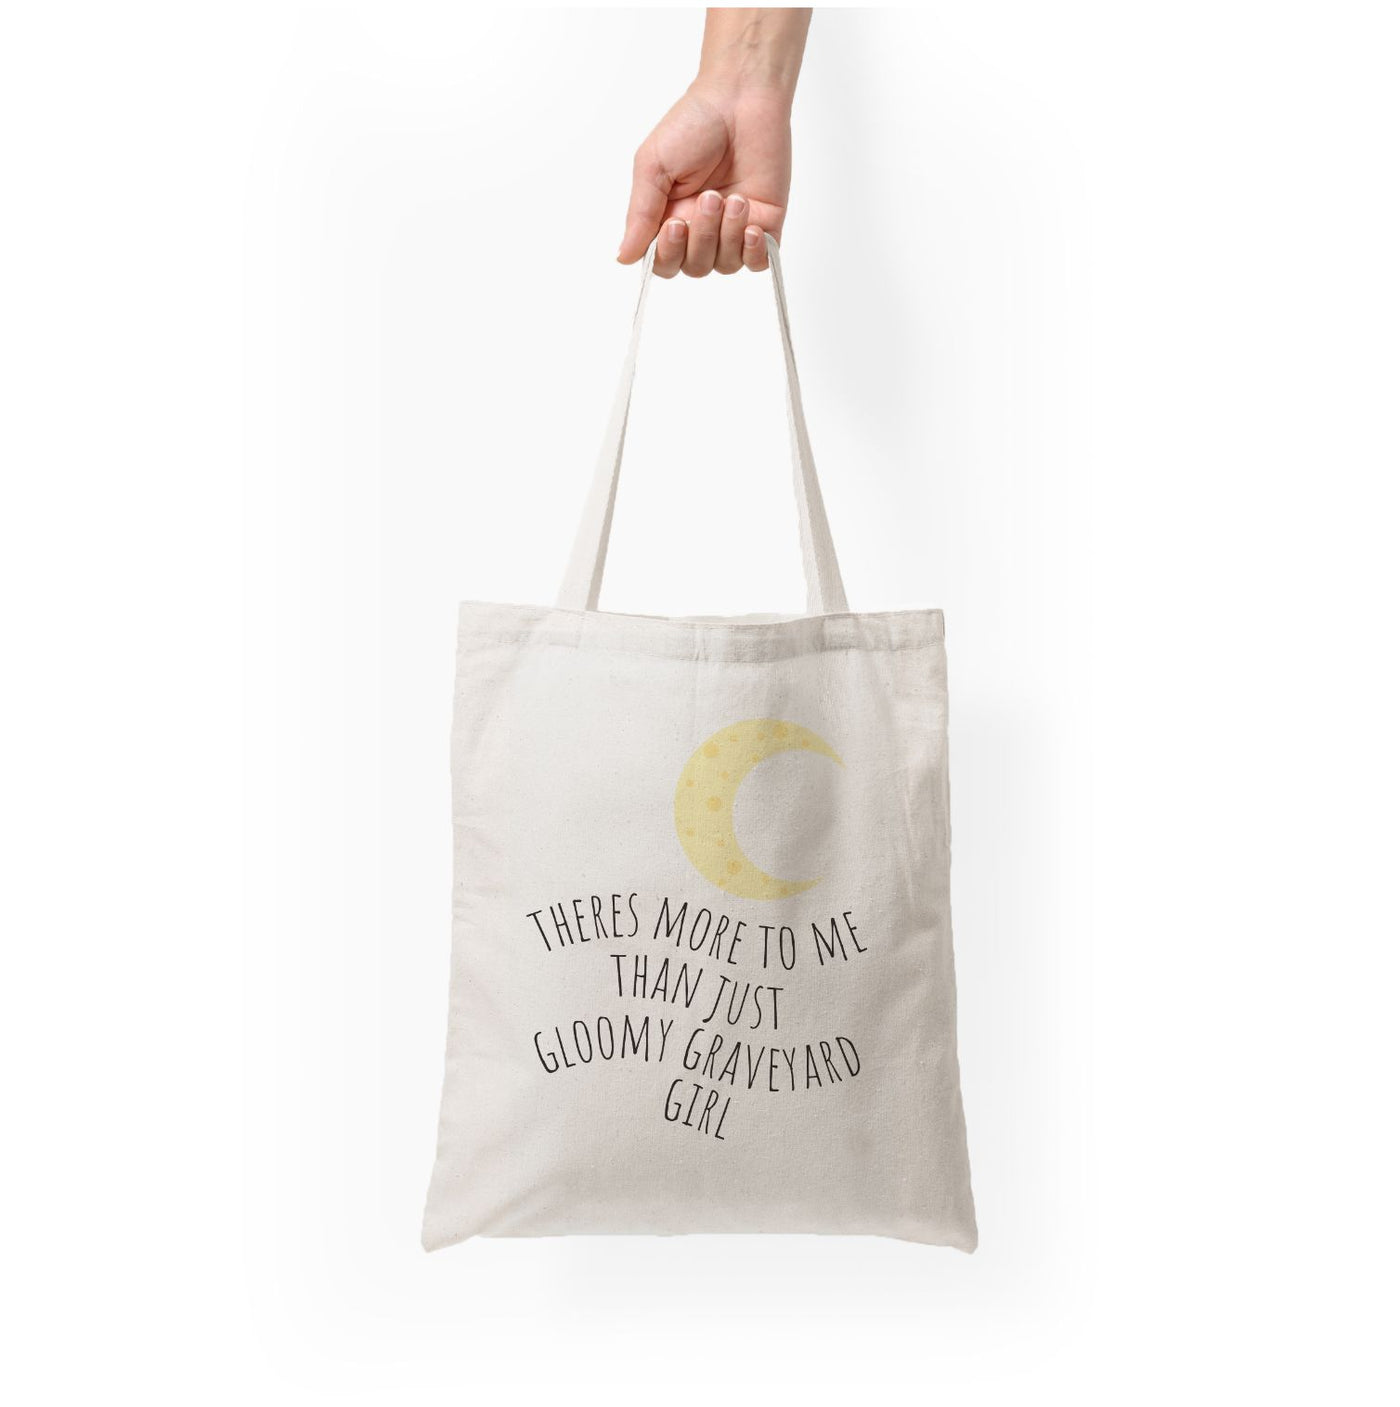 Theres More To Me - TV Quotes Tote Bag